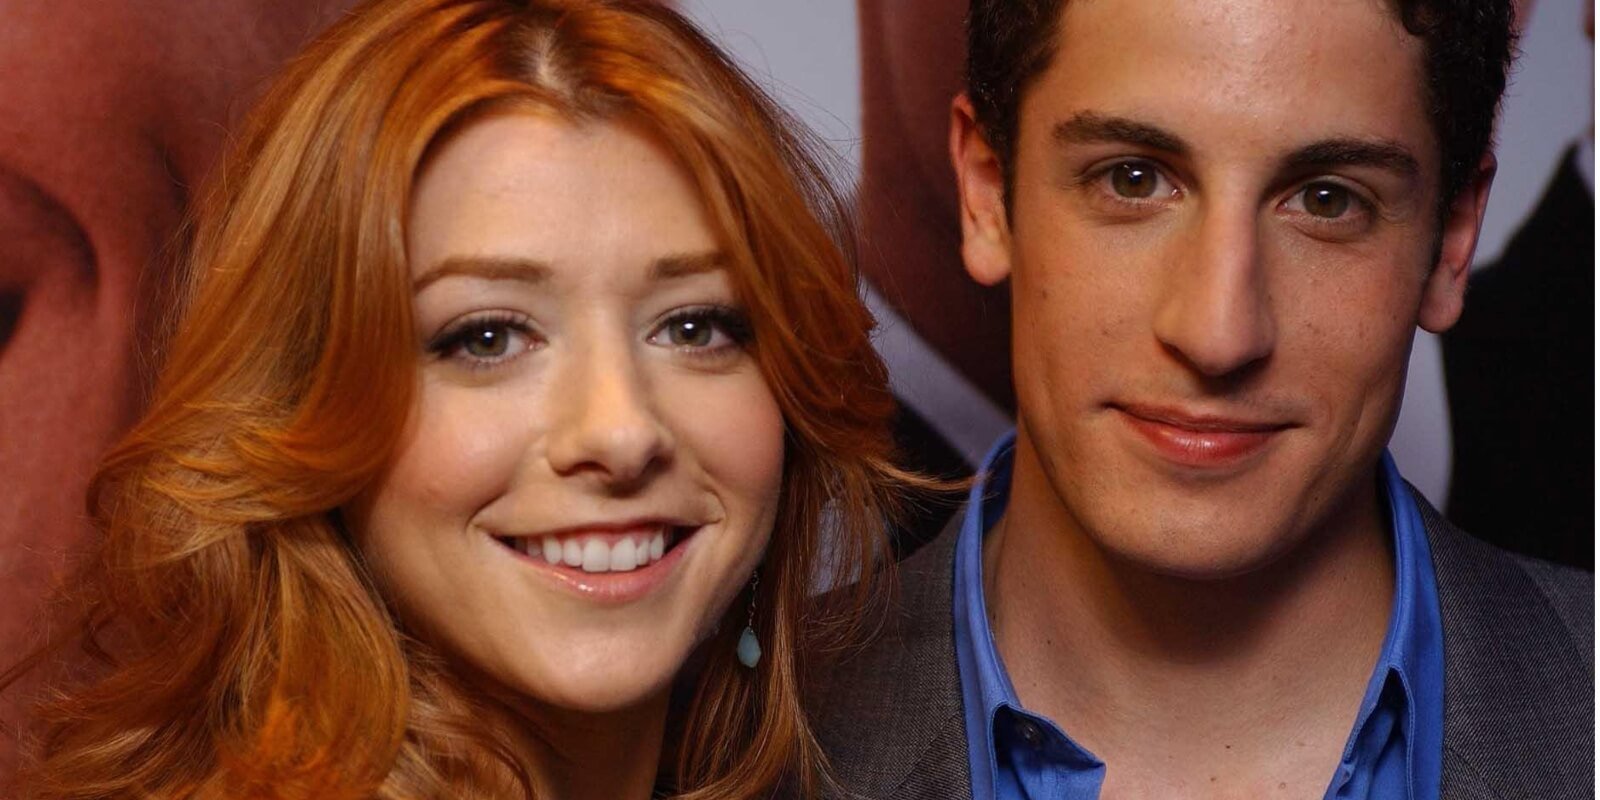 Alyson Hannigan and Jason Biggs were part of the cast of the film series 'American Wedding,' the third in the 'American Pie' trilogy.